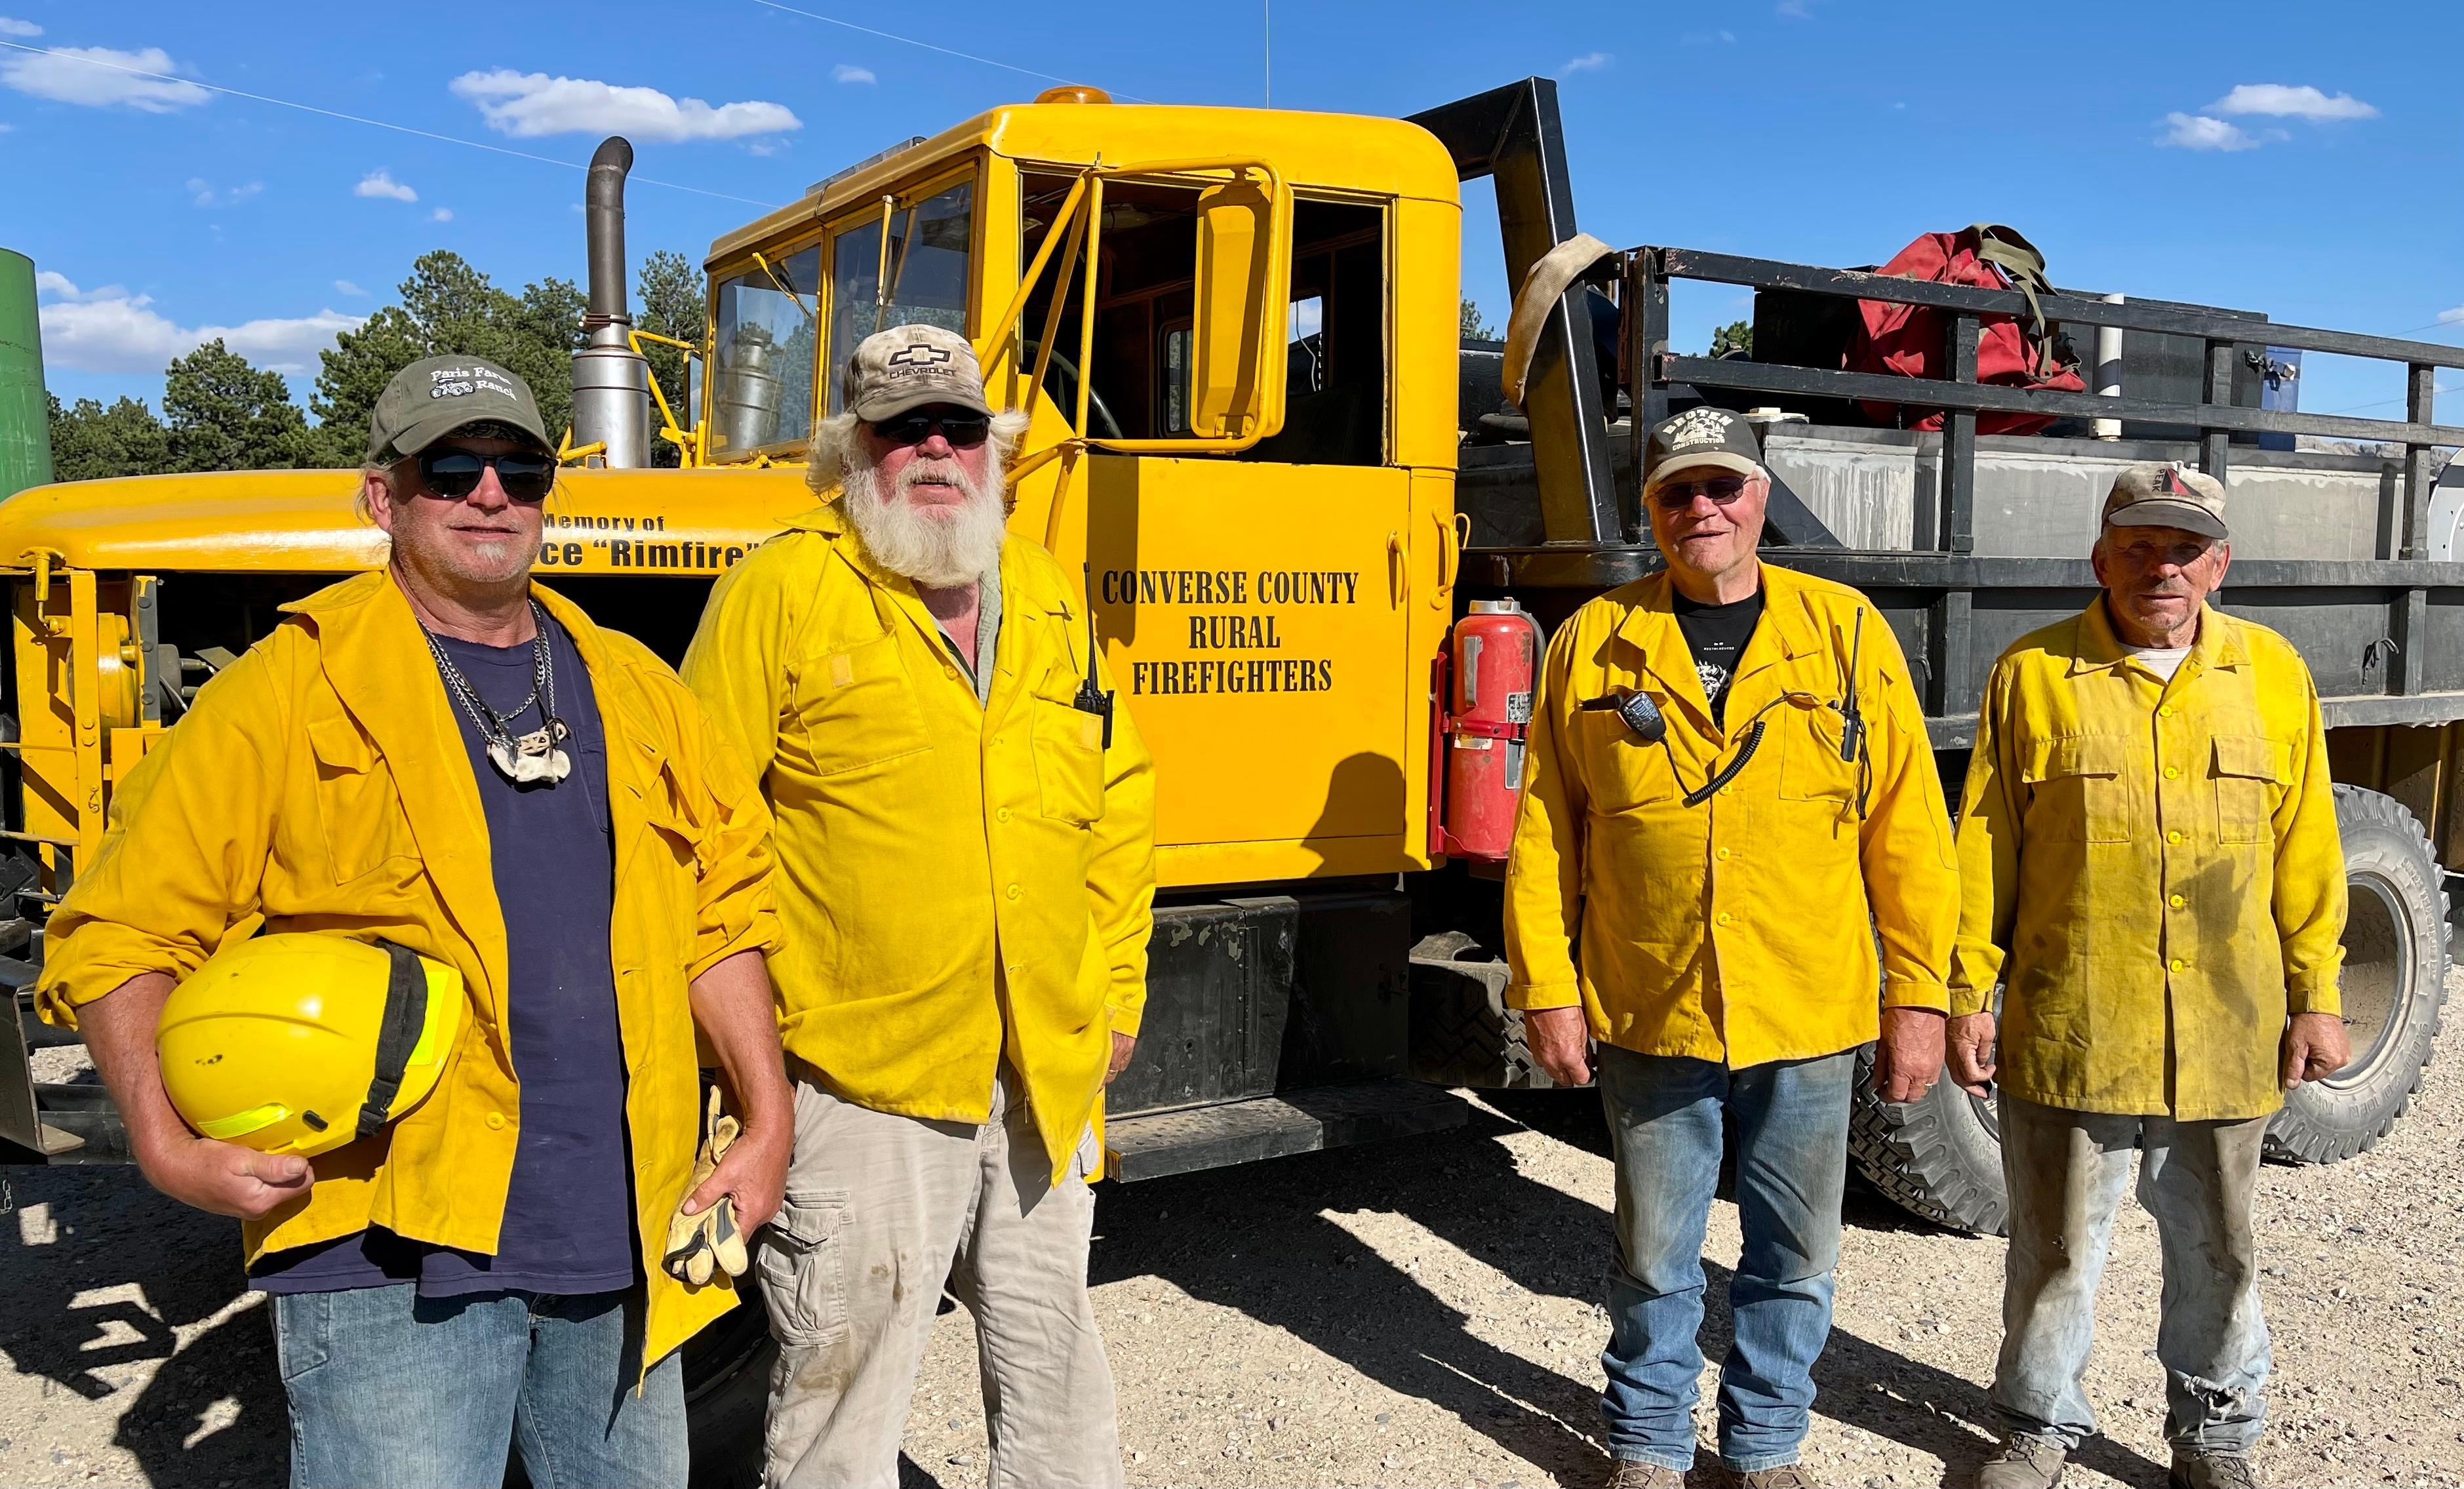 Four men wearing ball caps, yellow nomex shirts and blue jeans are standing in front of a yellow Converse County Rural Firefighters fire engine. 